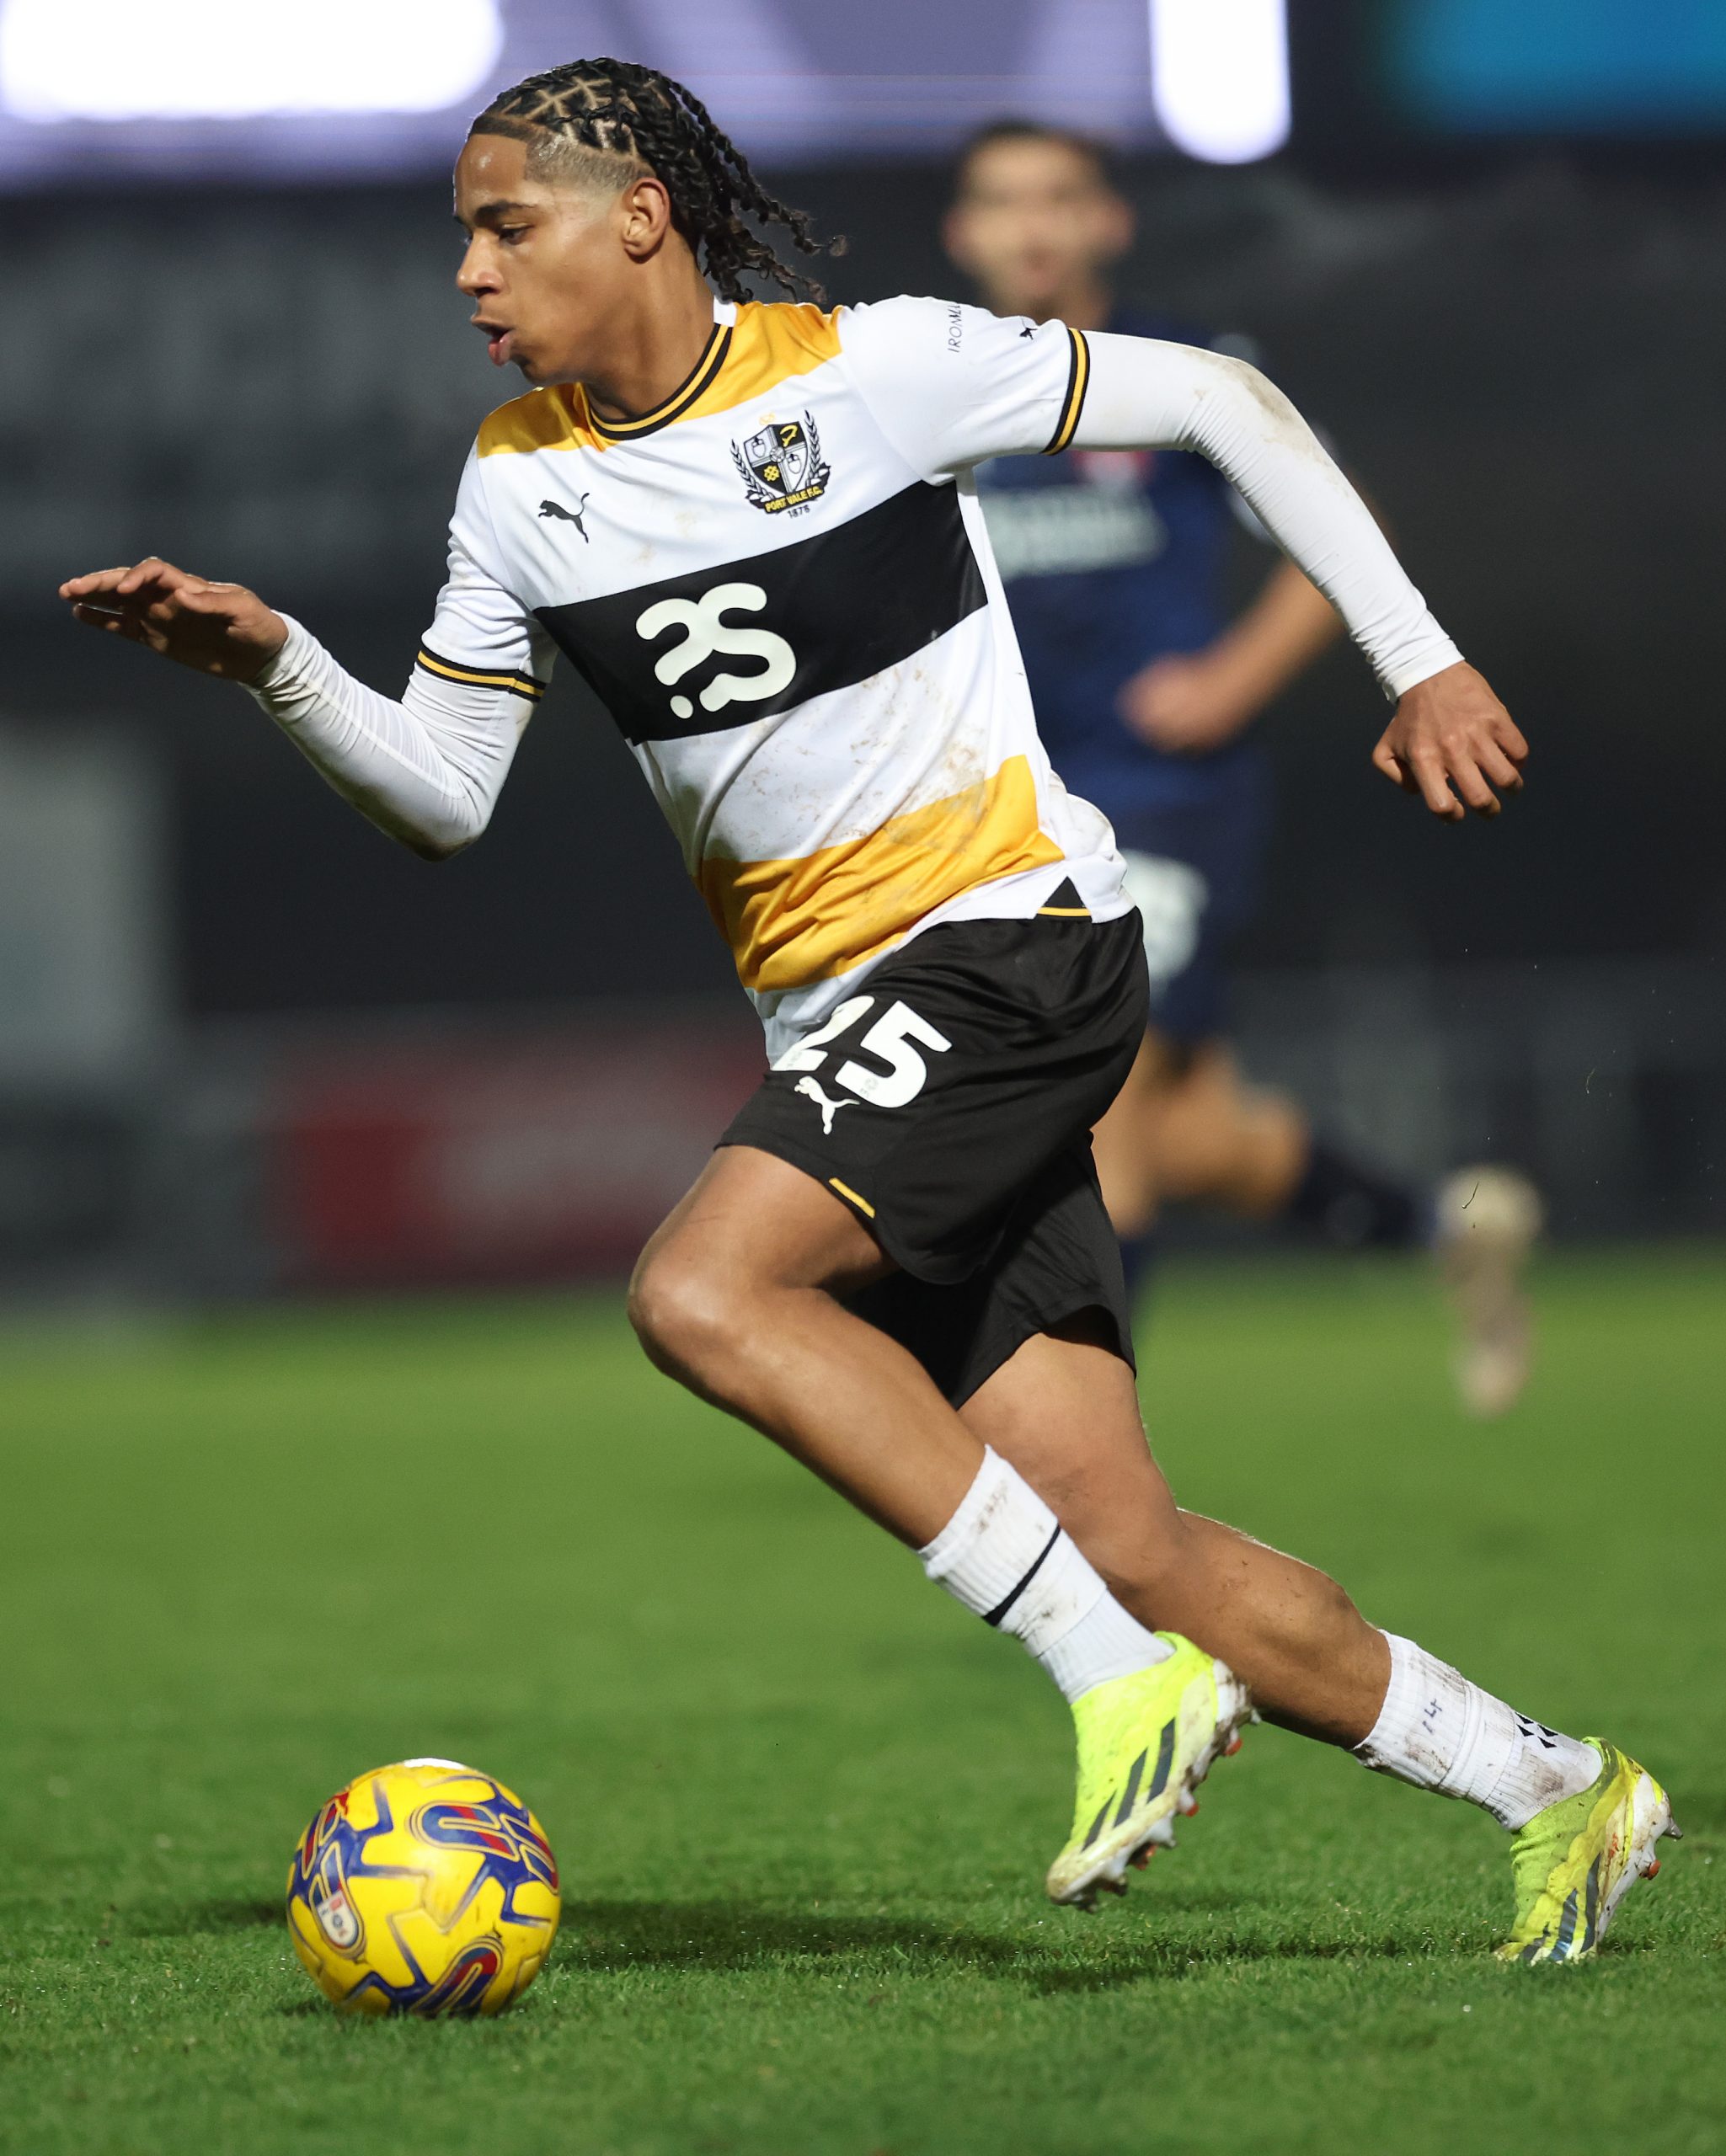 Man Utd chief Sir Jim Ratcliffe’s bid to find the next Kylian Mbappe takes him to League One Port Vale